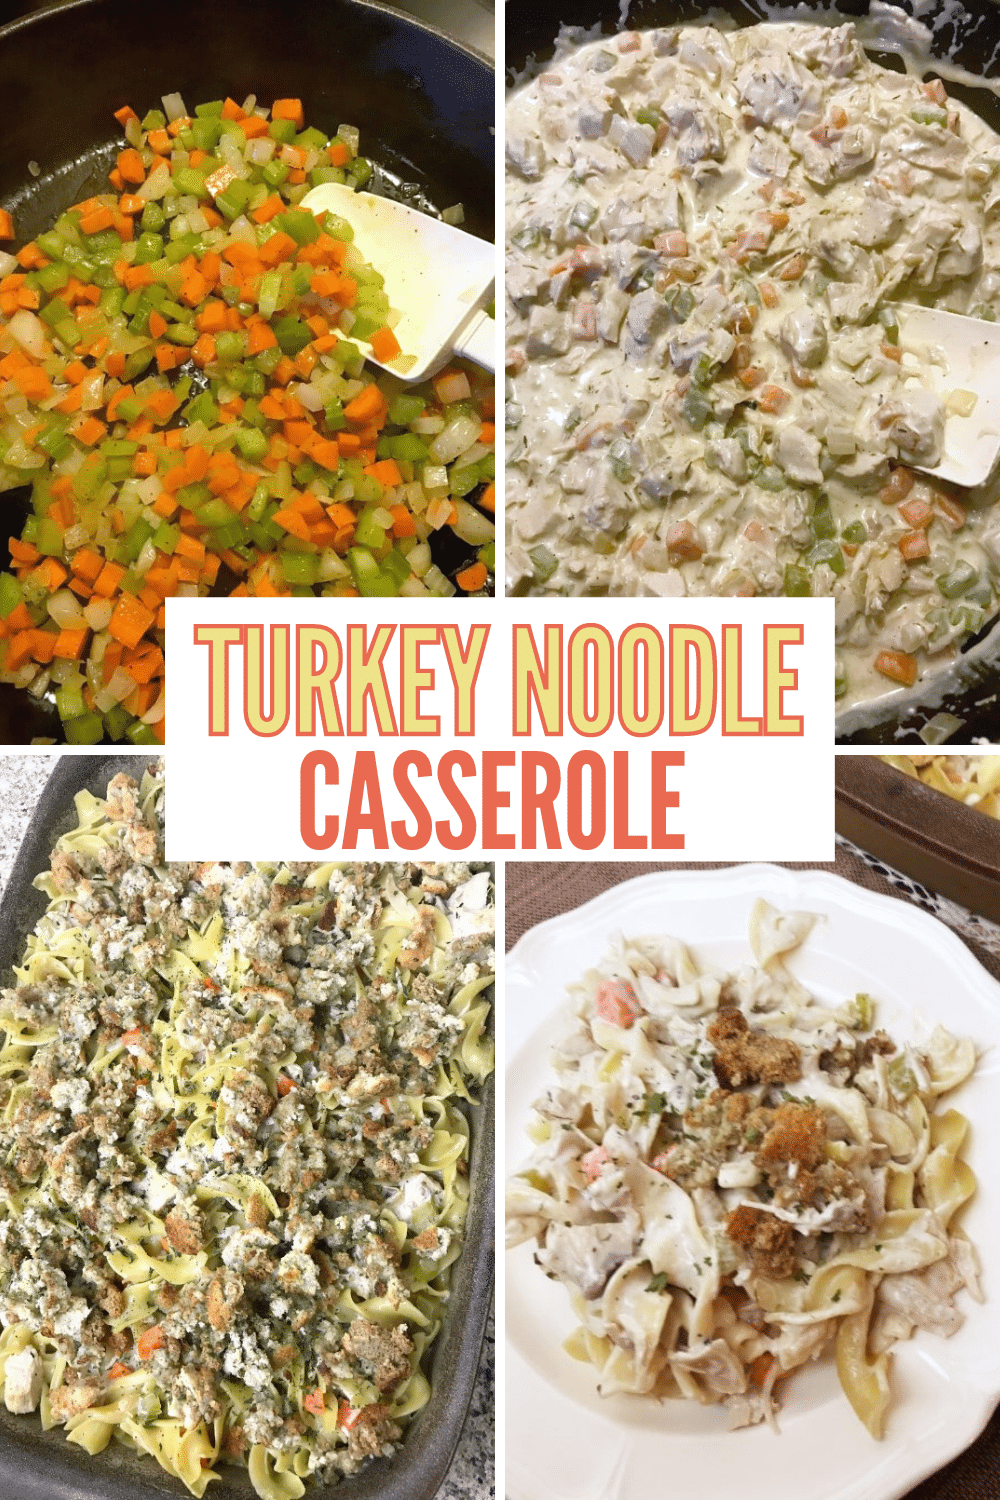 This turkey noodle casserole is so yummy and it's a great way to use leftover turkey or chicken. It's delicious! #turkey #casserole #easydinner via @wondermomwannab